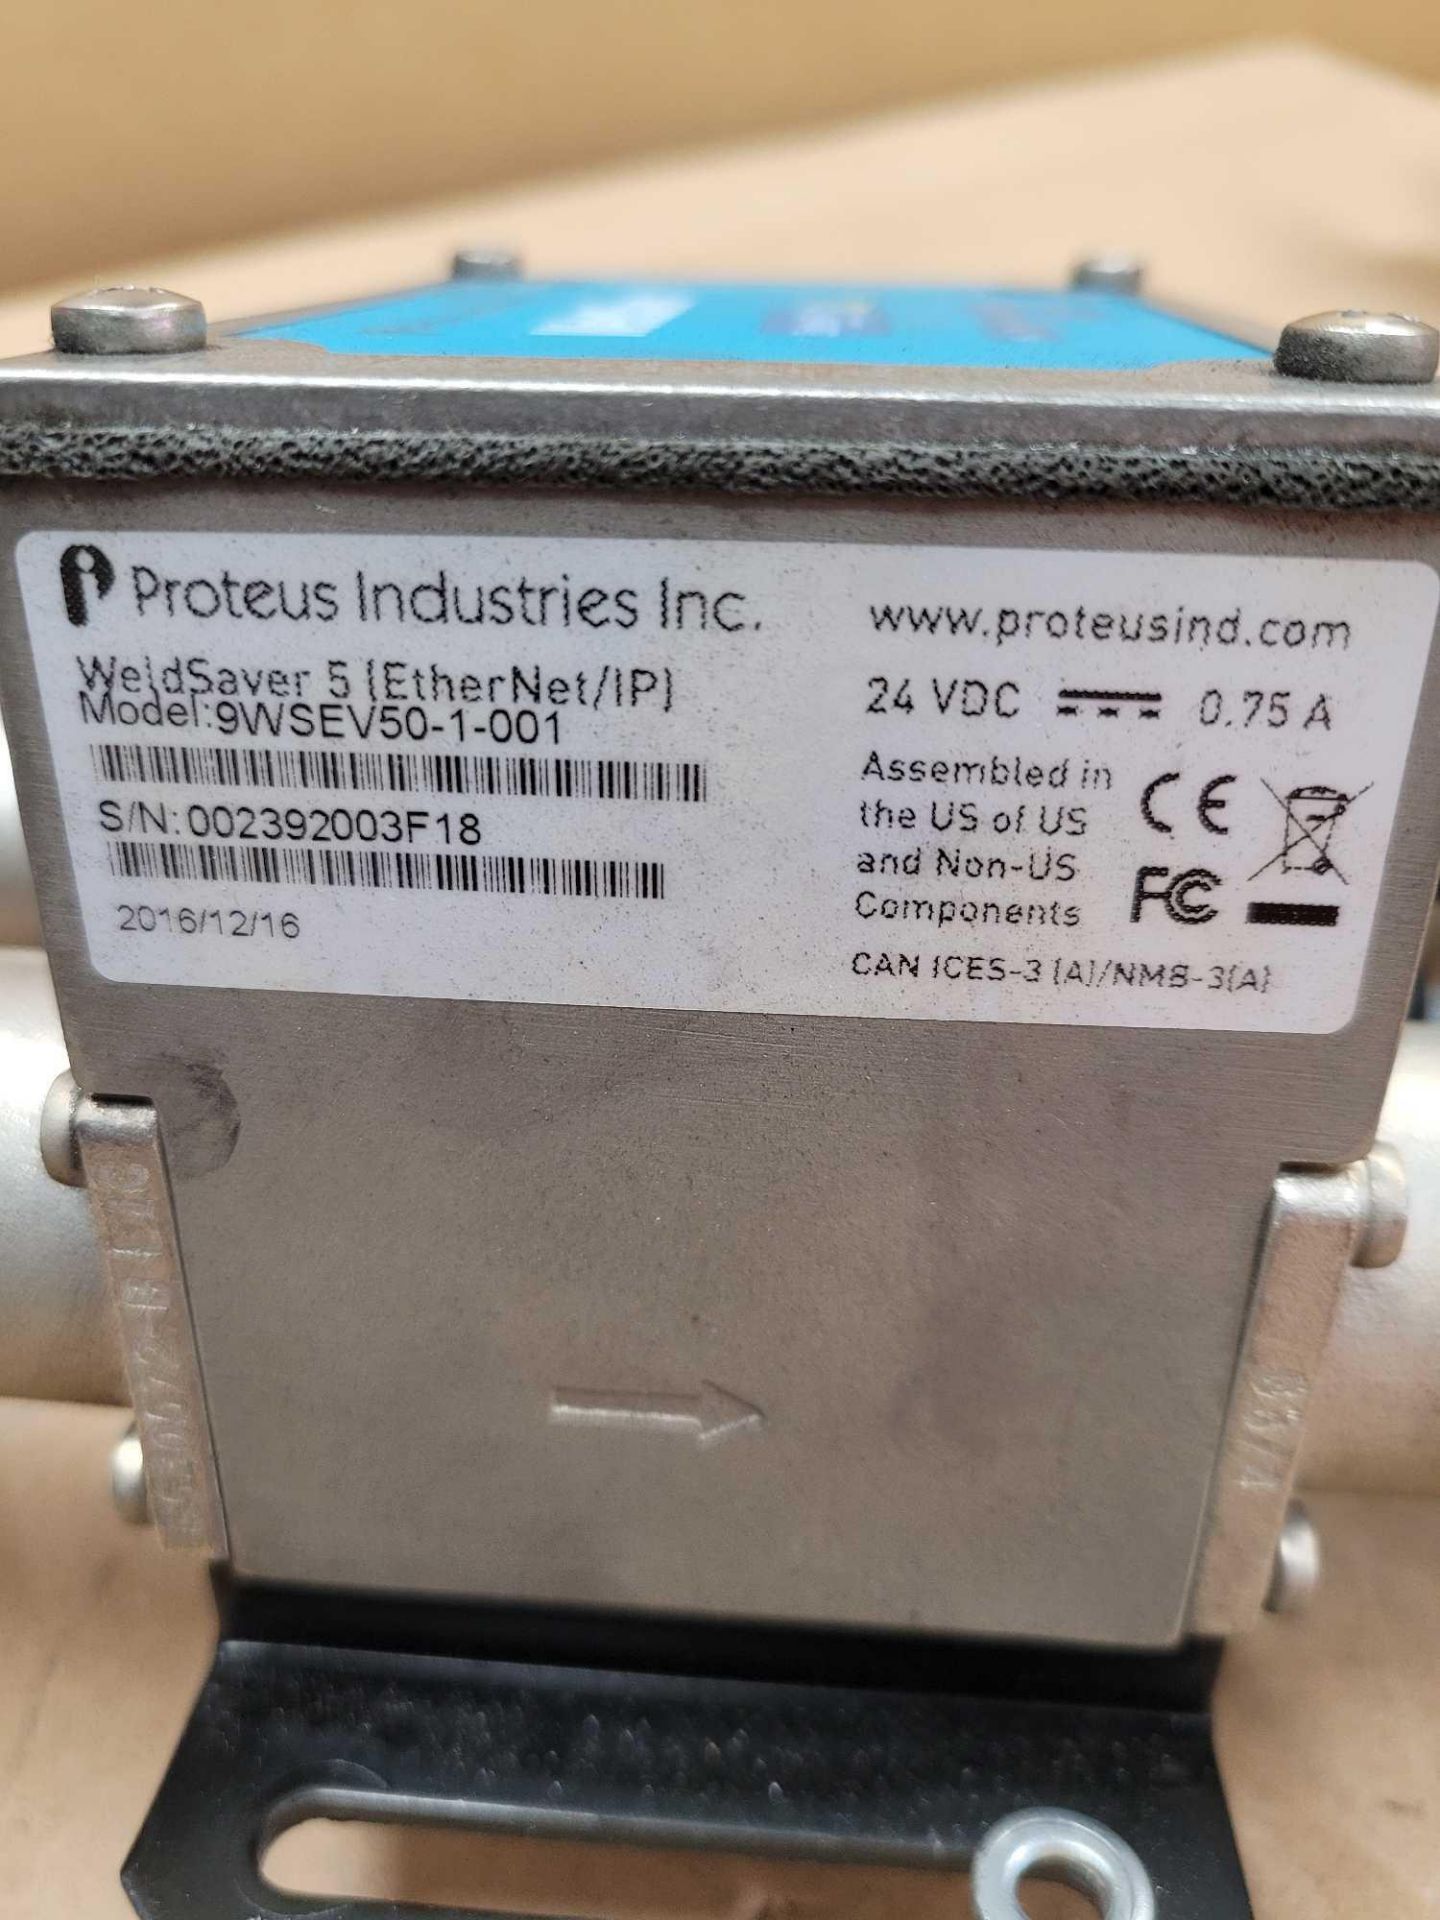 LOT OF 2 PROTEUS INDUSTRIES 9WSEV50G-1-001 with RAM 78000-001 and RAM MAC9000-001ESG / Weldsaver 5 w - Image 3 of 9